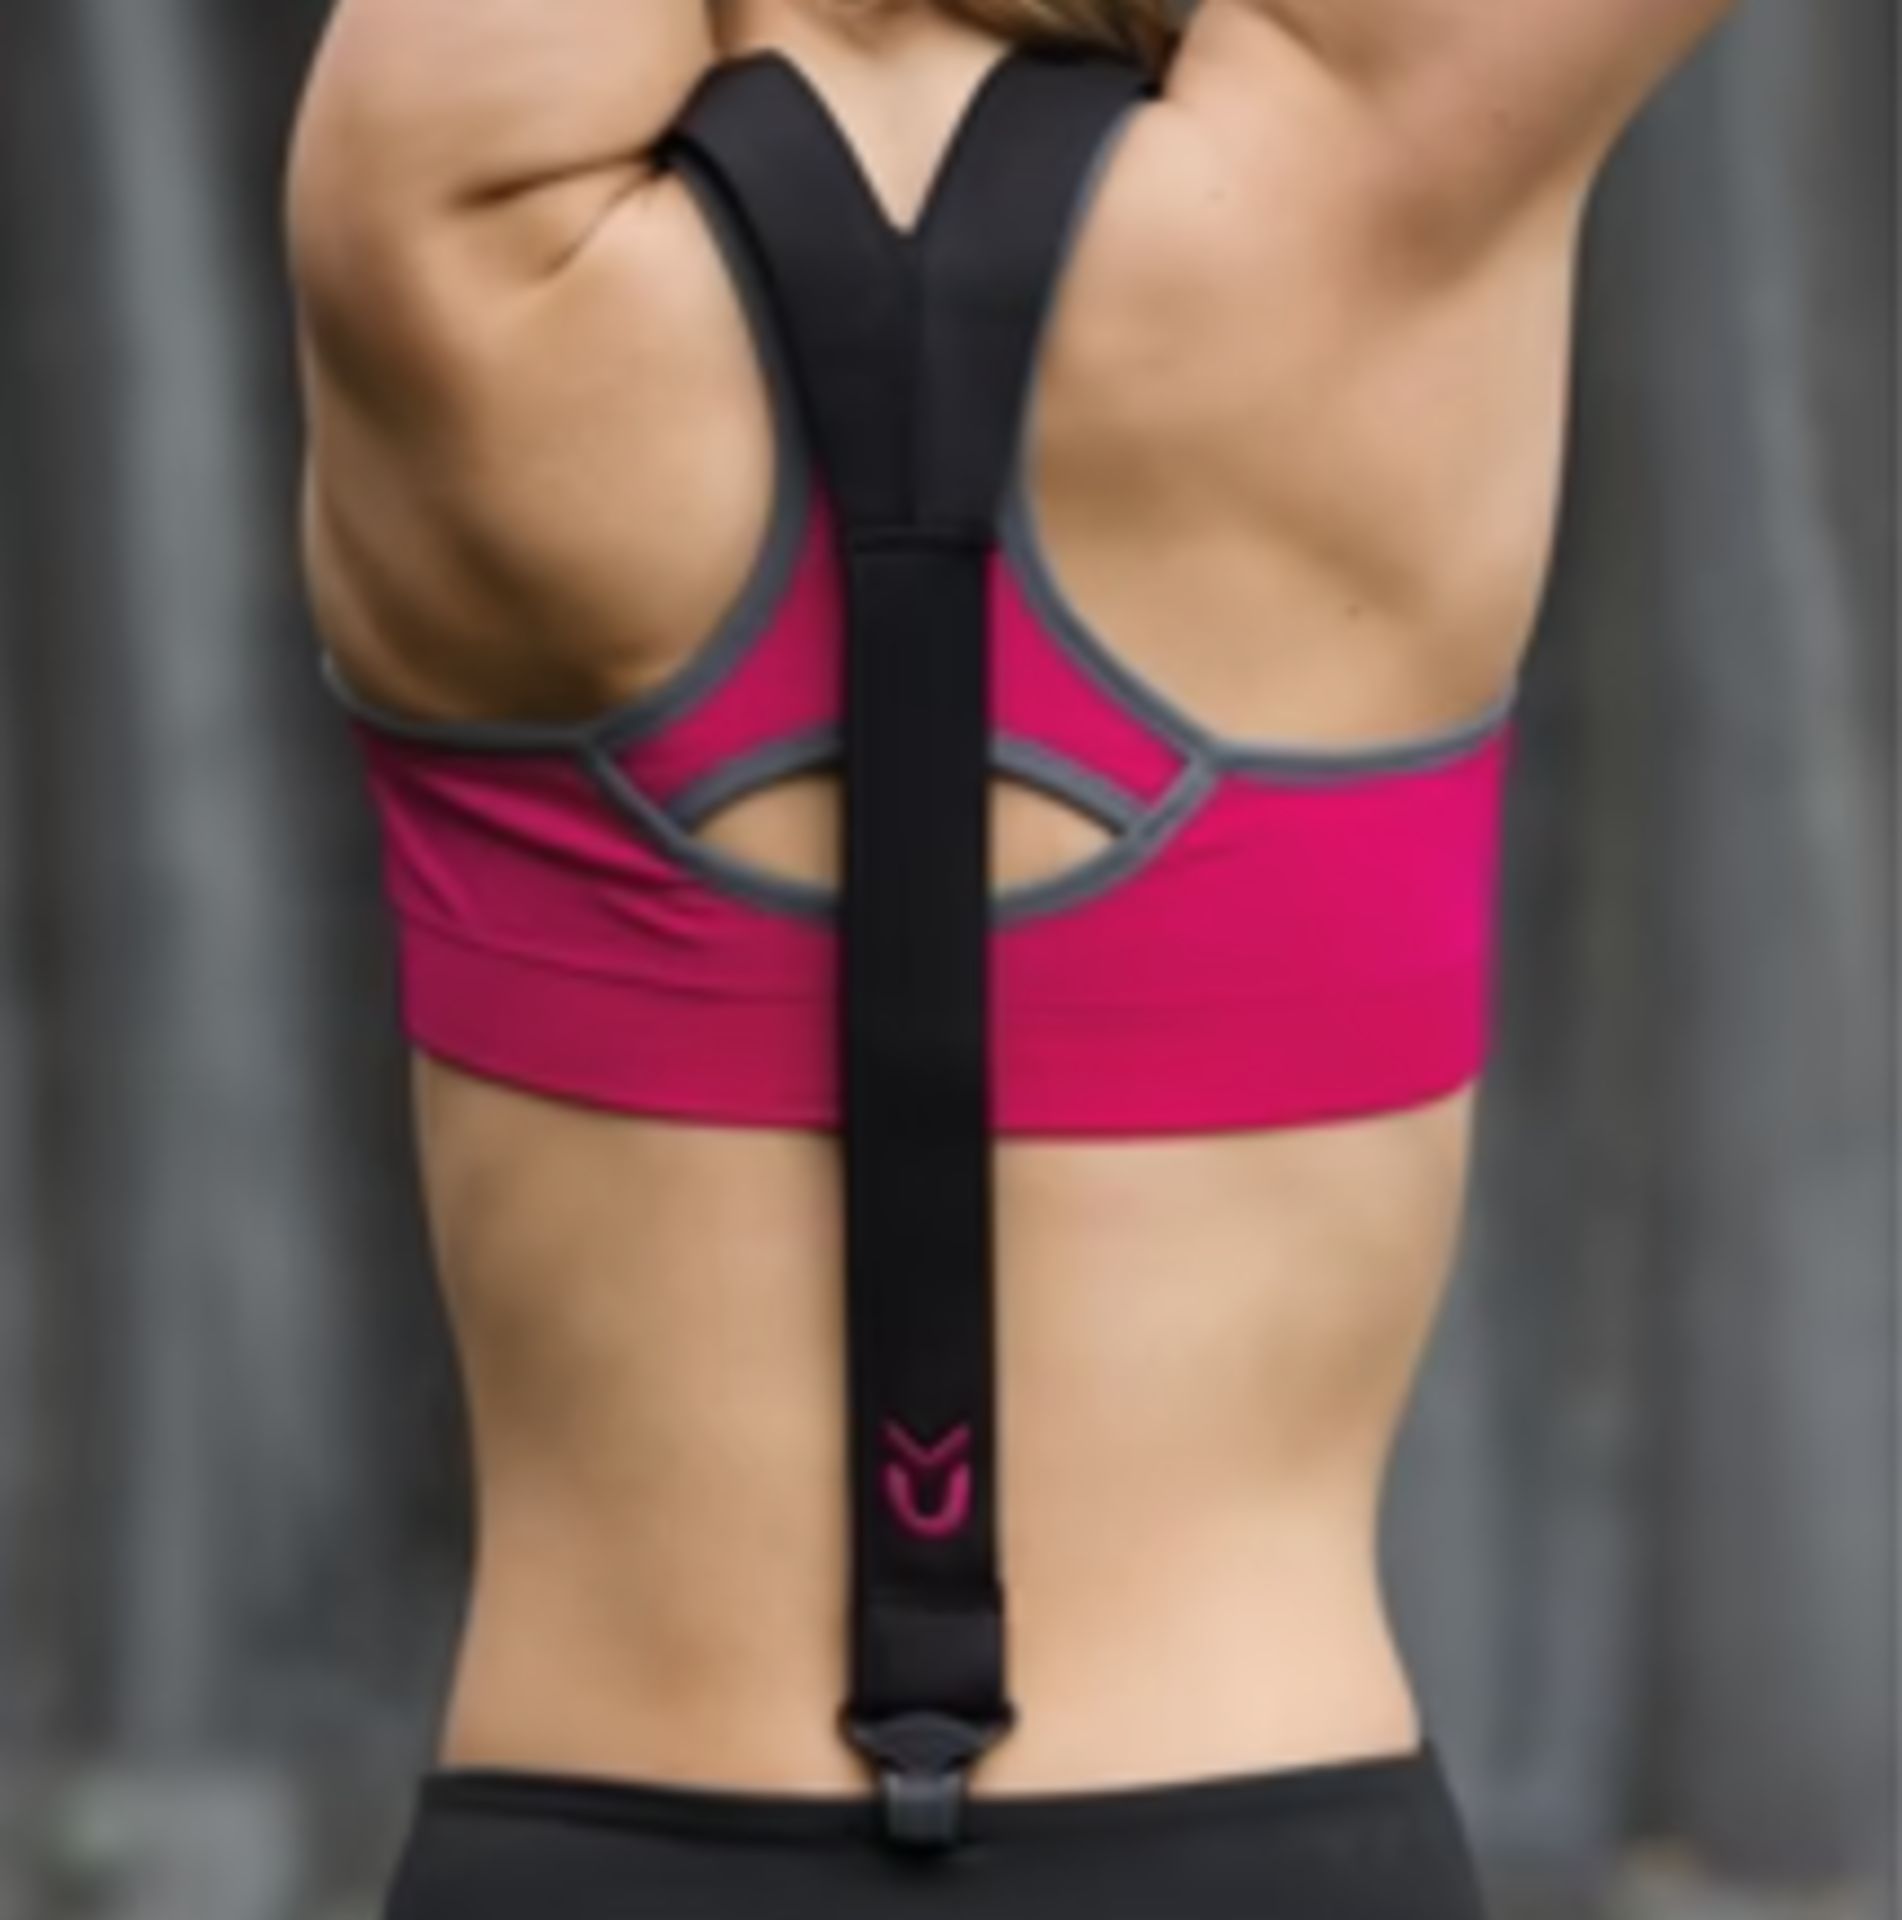 700 x FITUPS Fitness Braces/Suspenders For Running and Exercising Total RRP £21,000 - Image 2 of 3